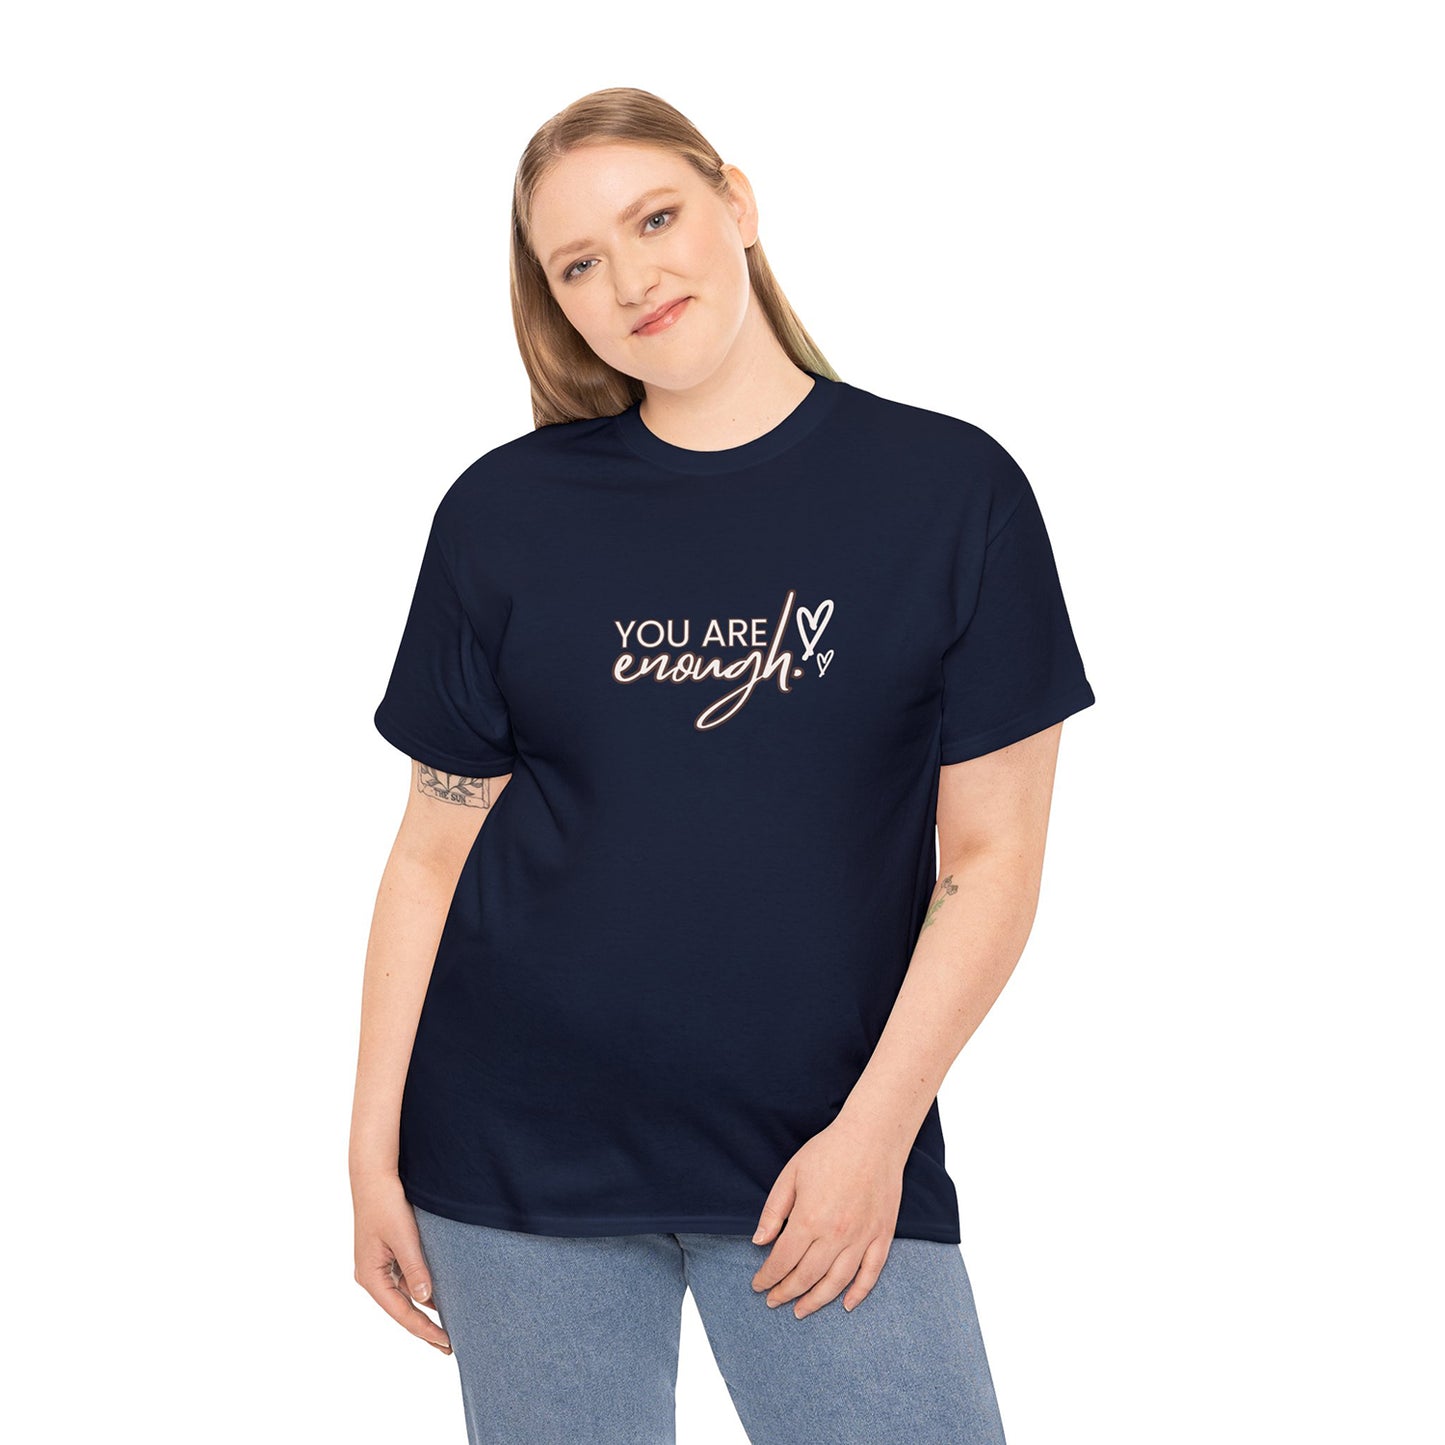 women's T shirt with Unique printing design